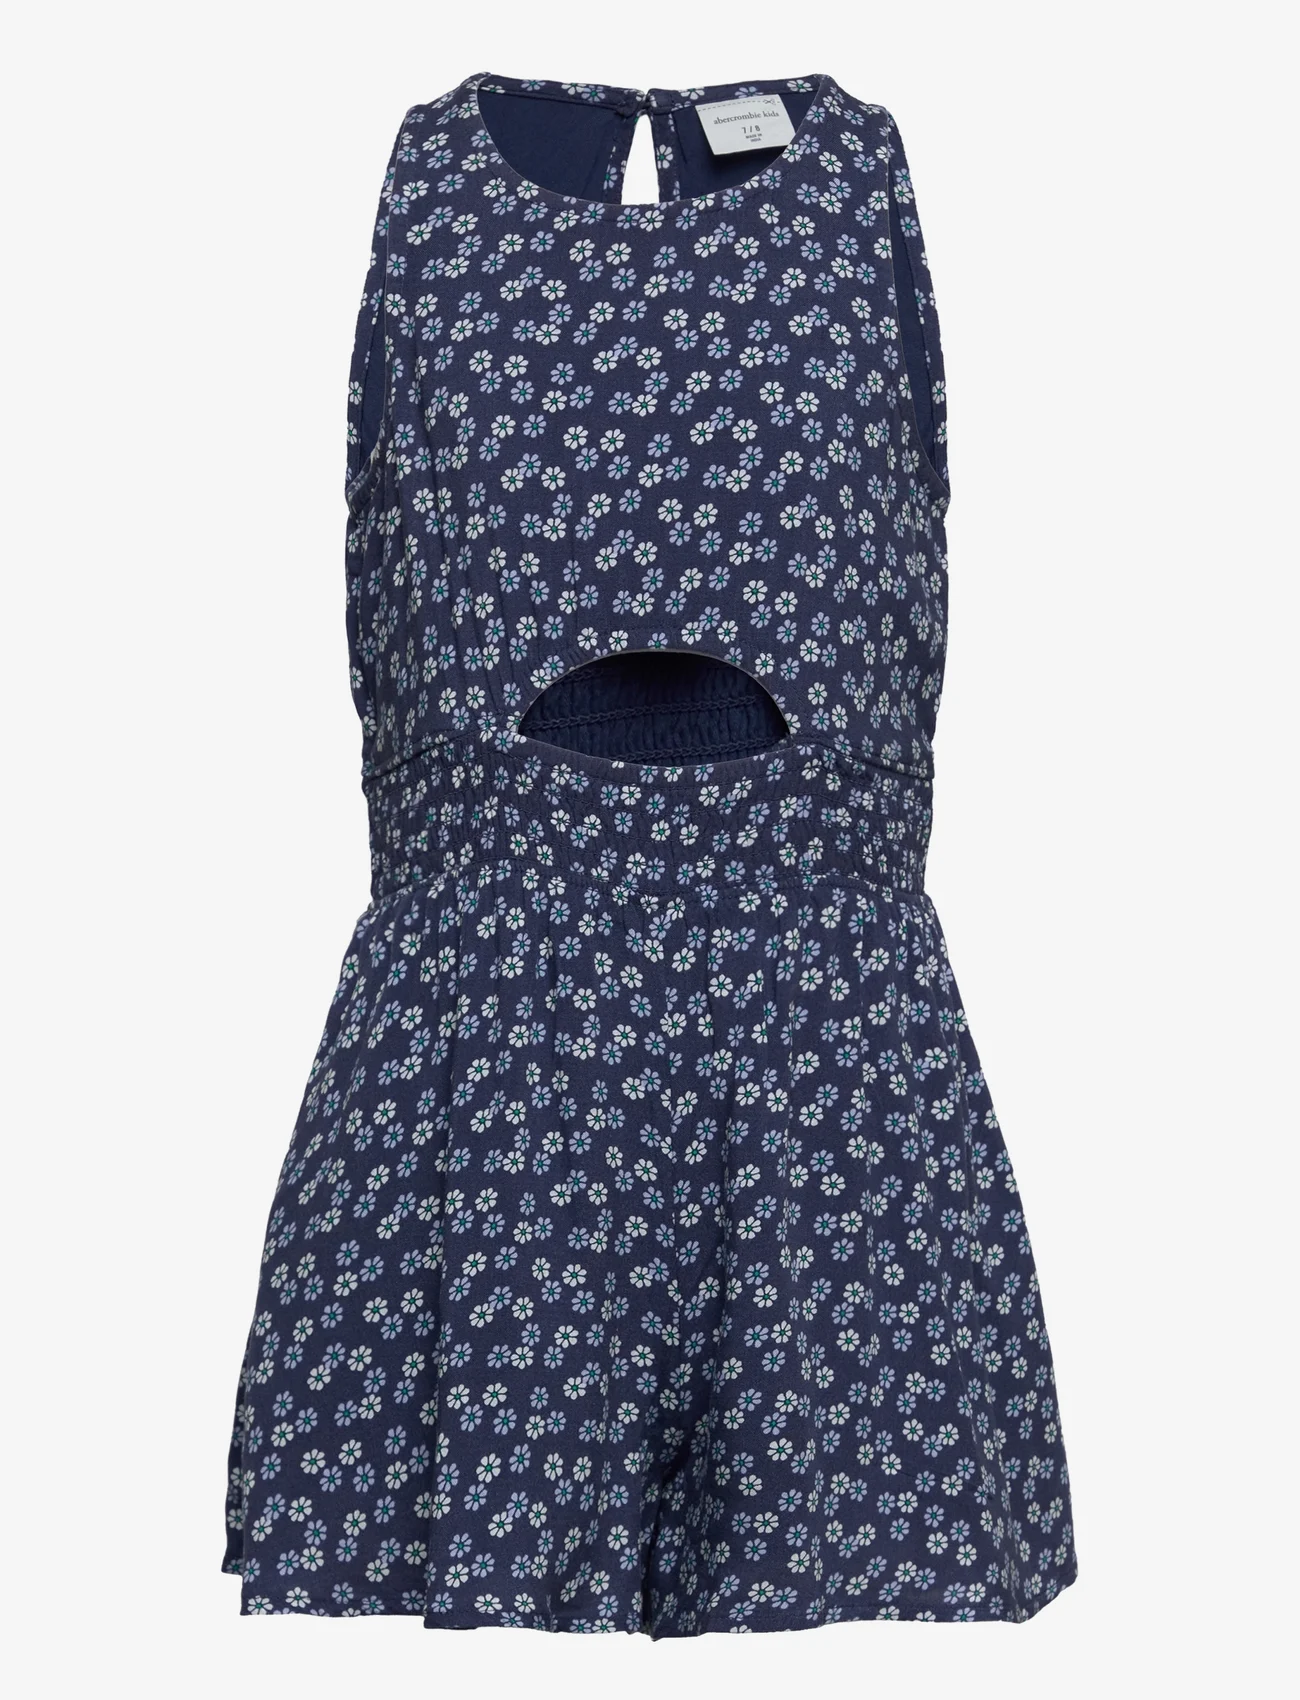 Abercrombie & Fitch - kids GIRLS DRESSES - casual dresses - navy floral - 0